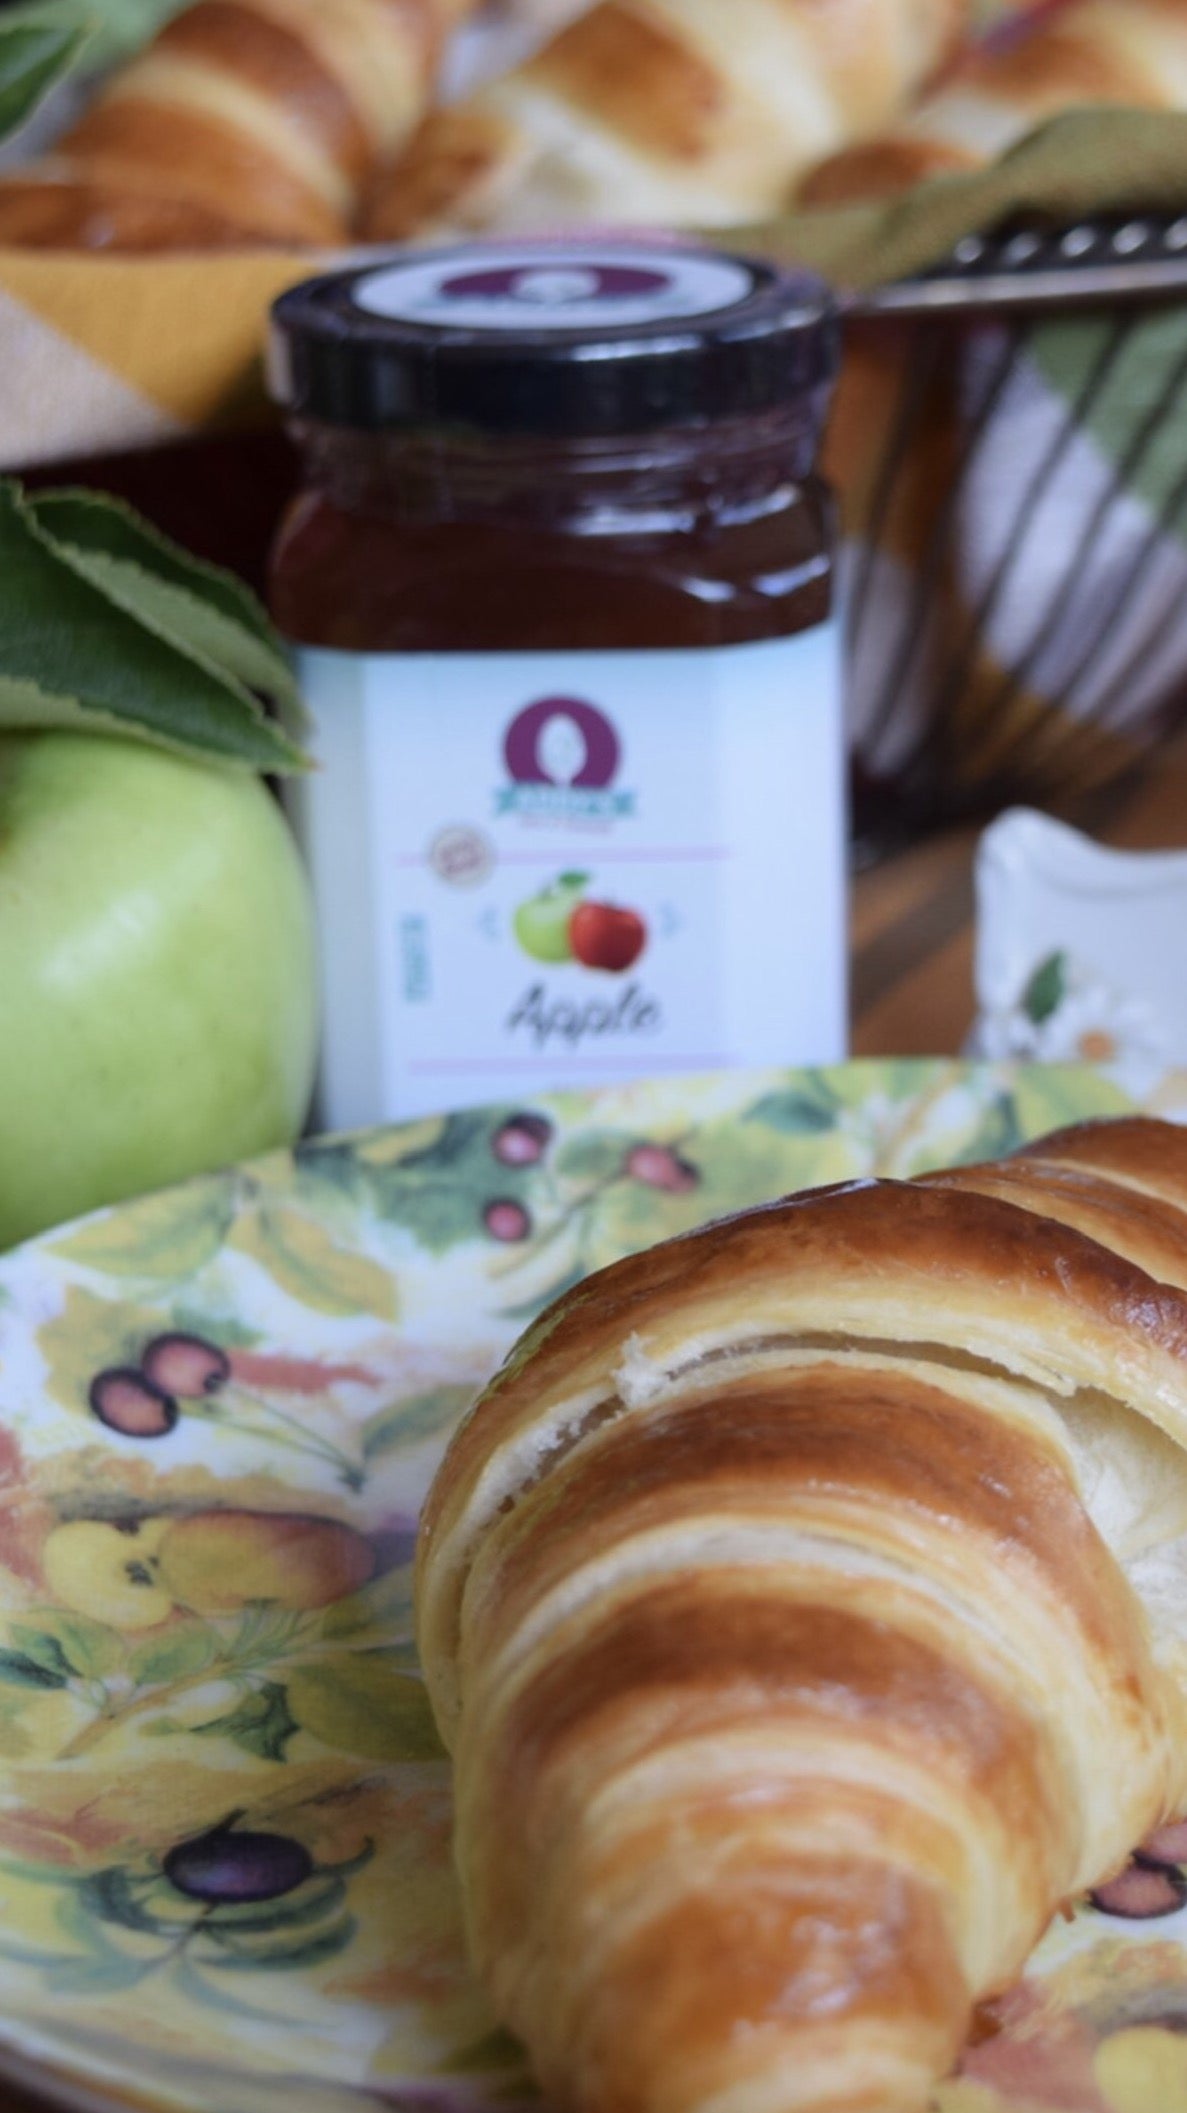 Addy's Apple Jelly